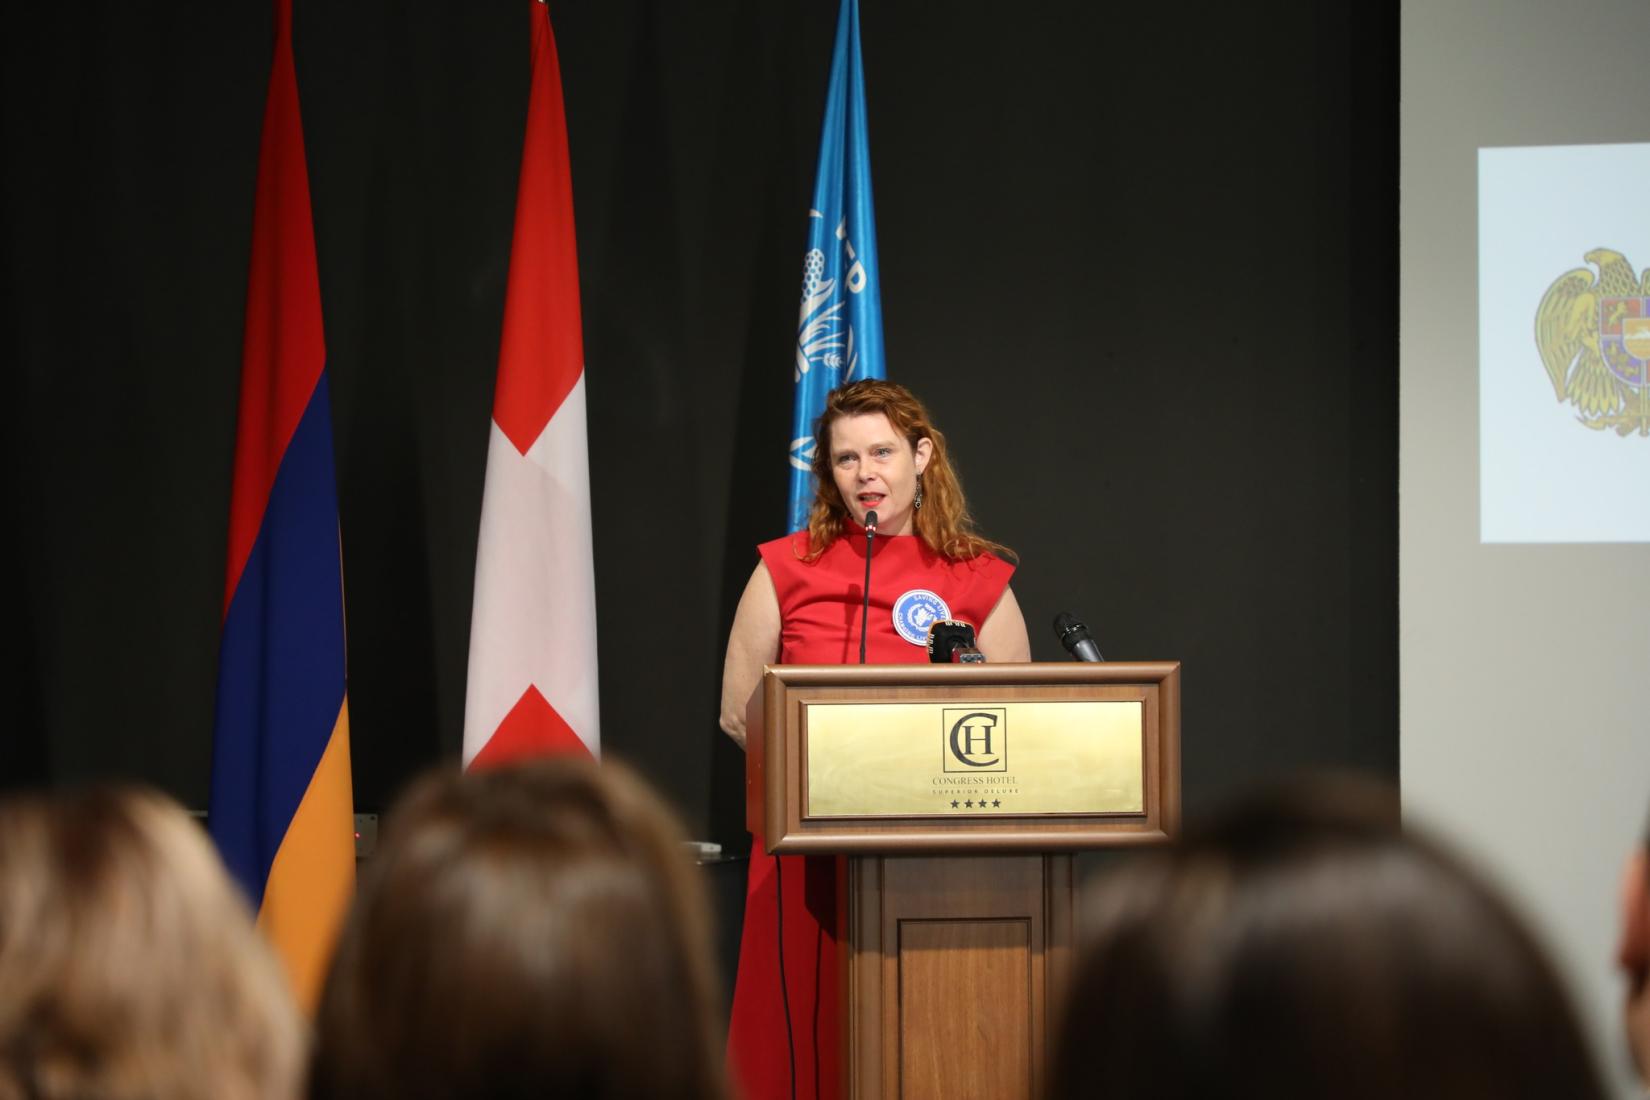 WFP Deputy Country Director and Officer-in-Charge in Armenia, Nanna Skau made opening remarks.